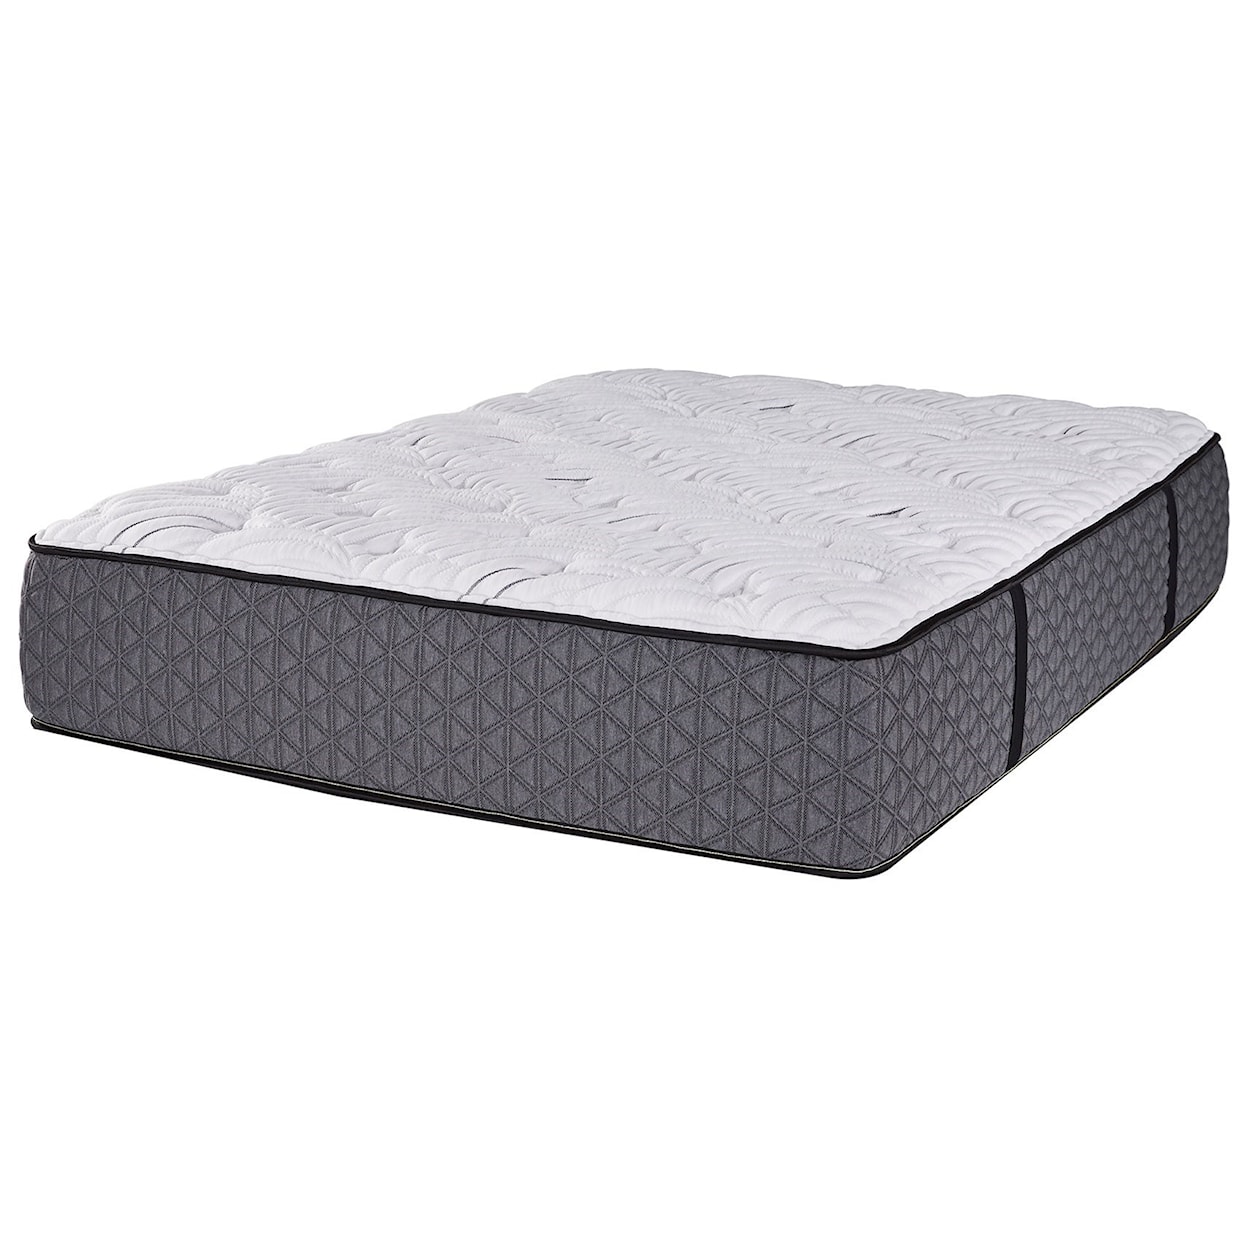 Restonic Stratford Firm 2 Sided Queen Firm 2-Sided Mattress